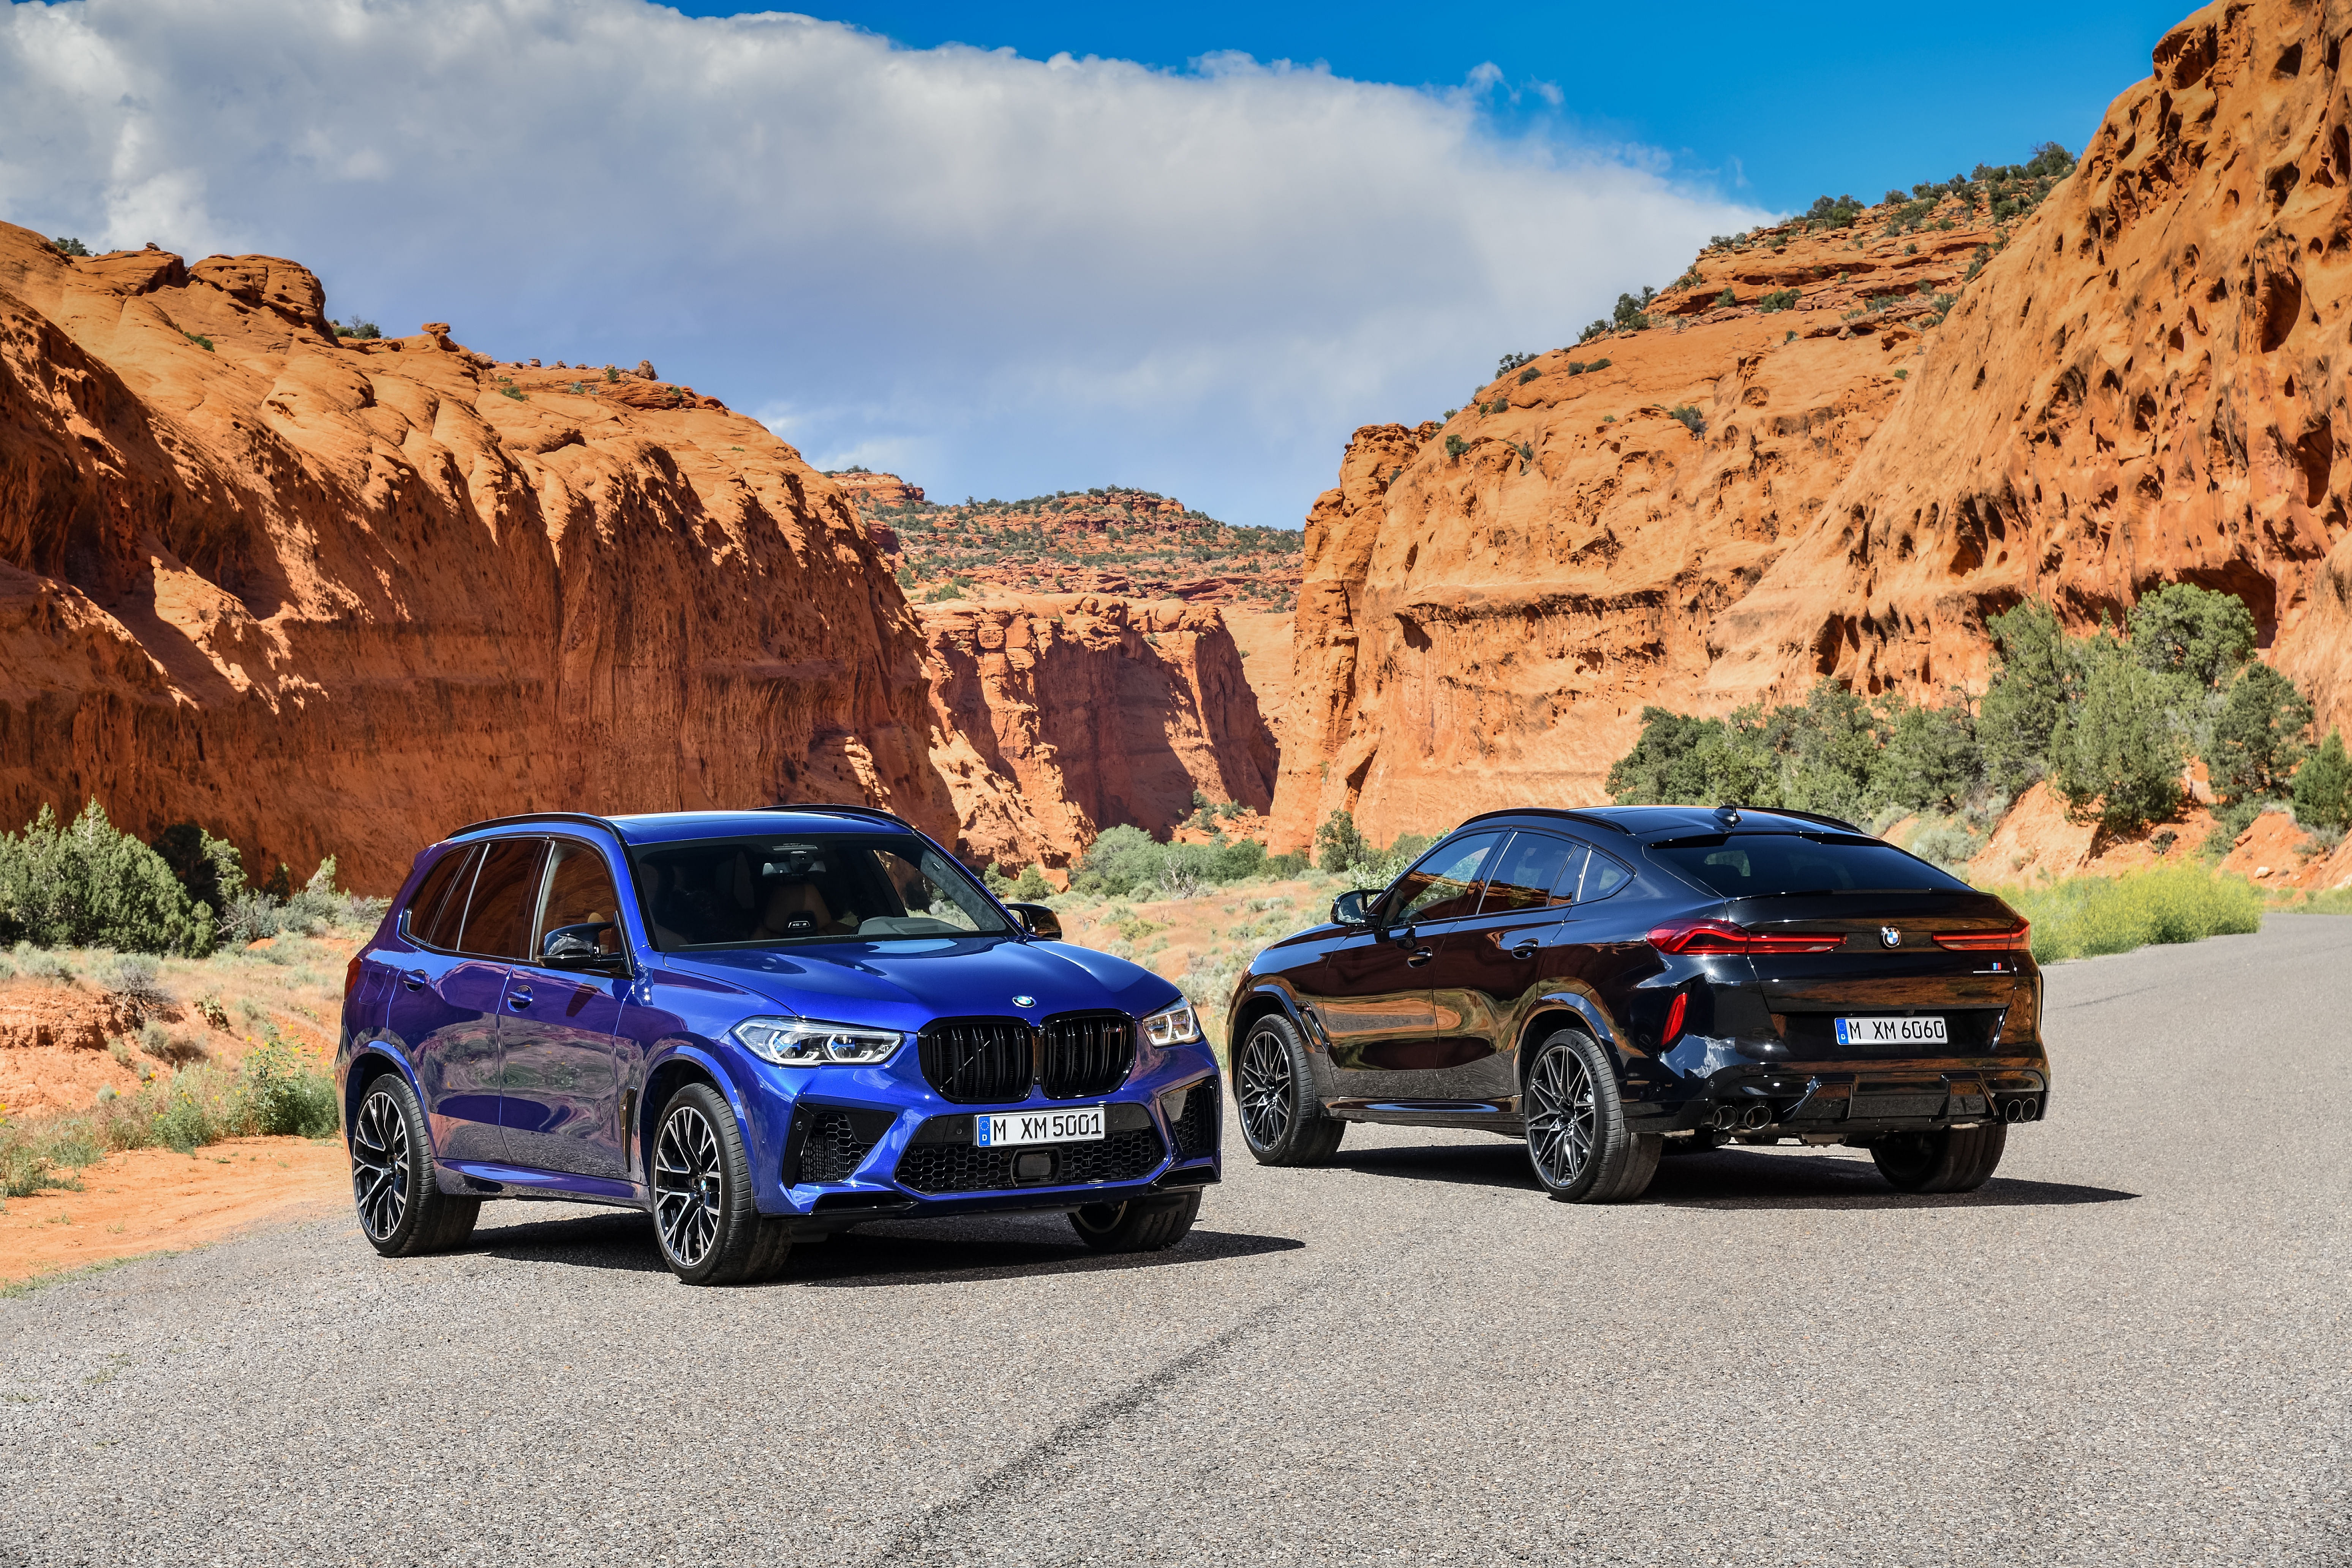 The BMW X5 M and BMW X6 M Competitions.